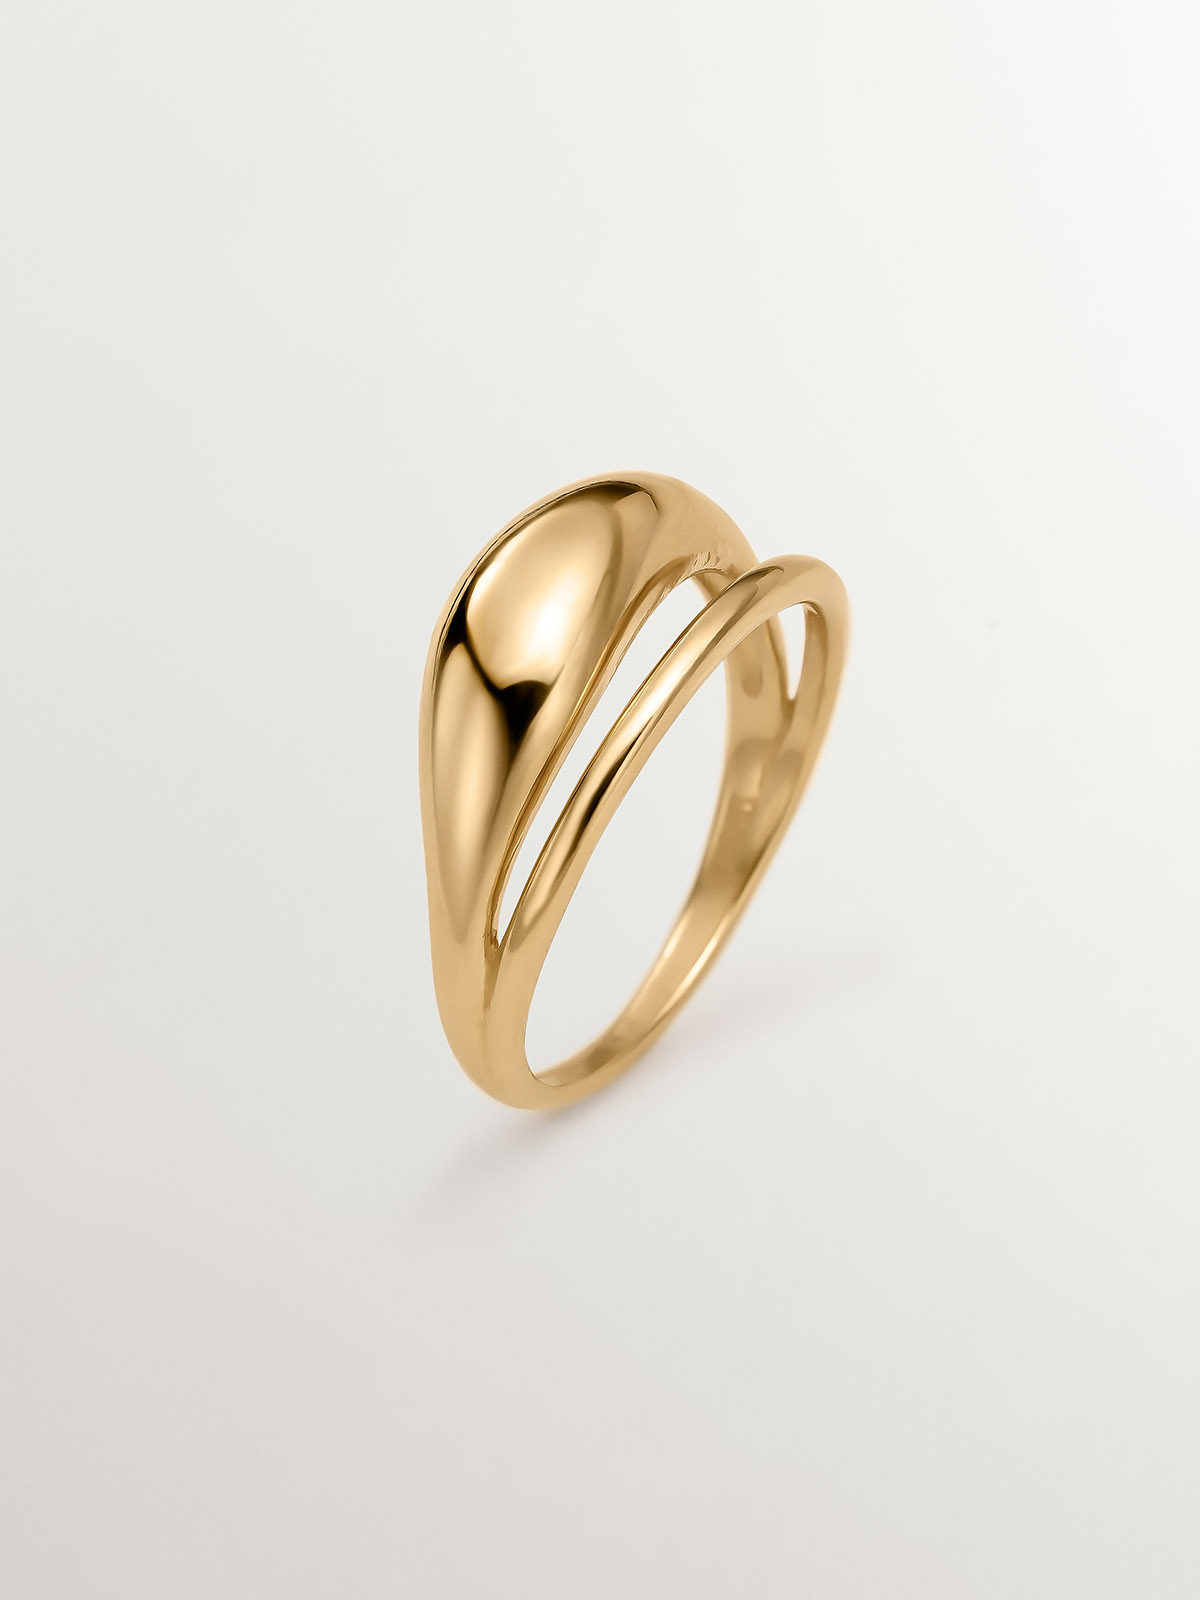 925 Silver Double Ring coated in 18K Yellow Gold